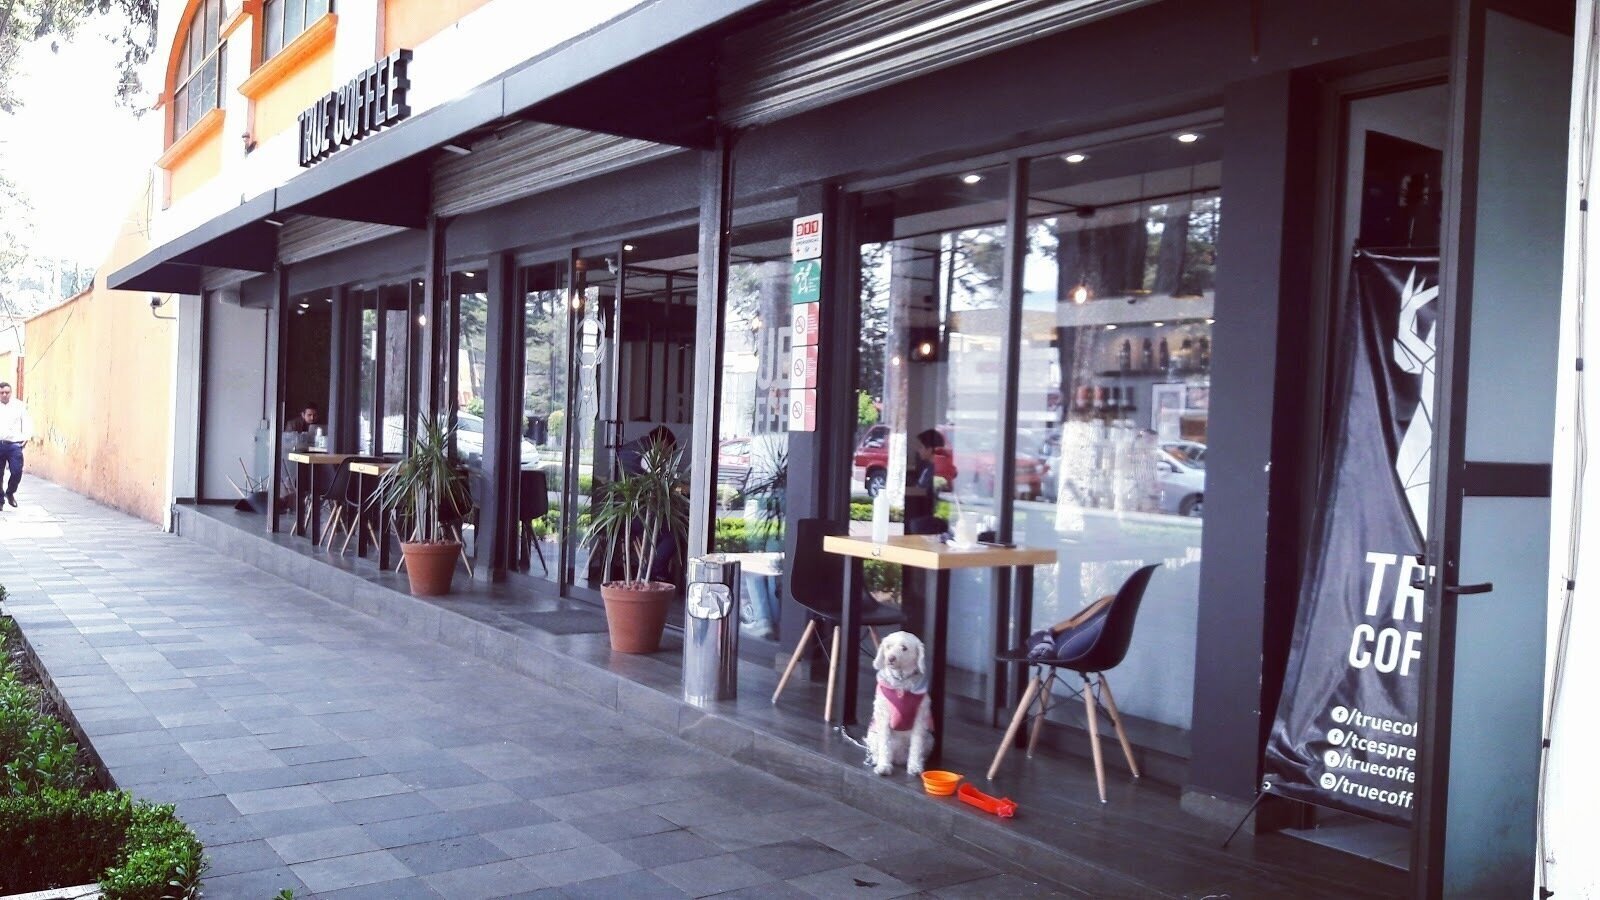 <span class="translation_missing" title="translation missing: en.meta.location_title, location_name: True Coffee Colón, city: Toluca">Location Title</span>